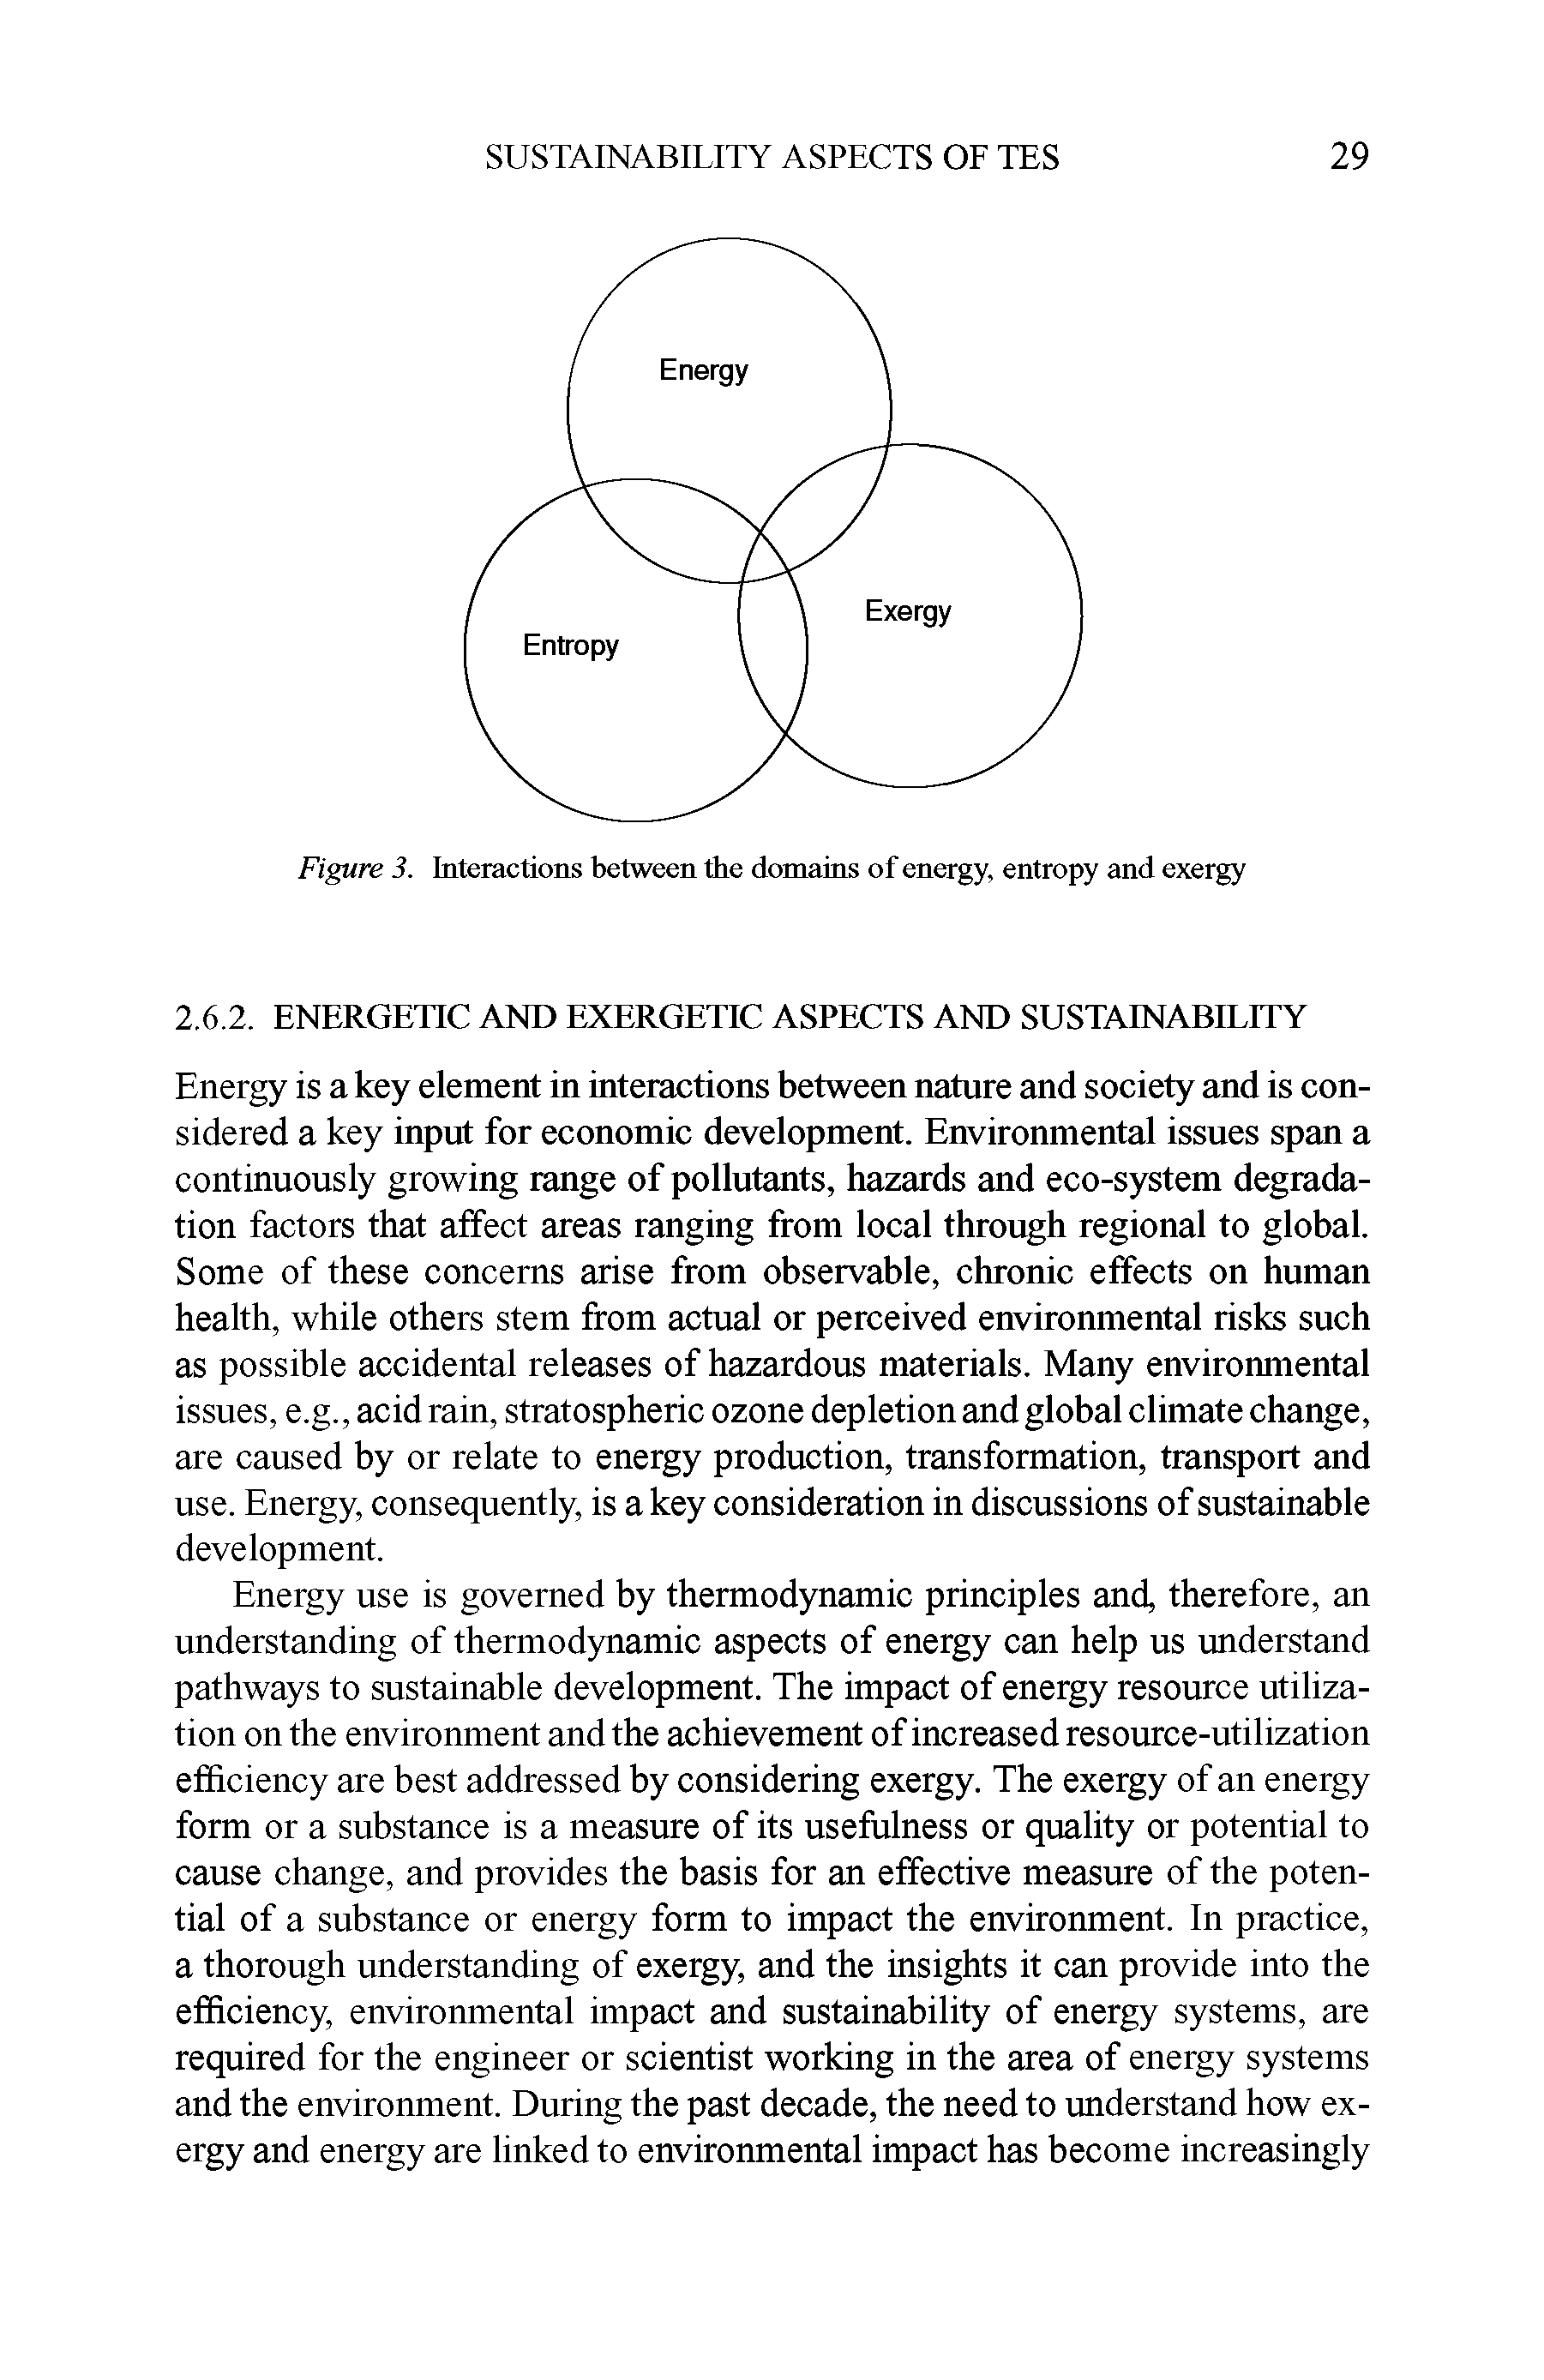 Figure 3. Interactions between the domains of energy, entropy and exergy...